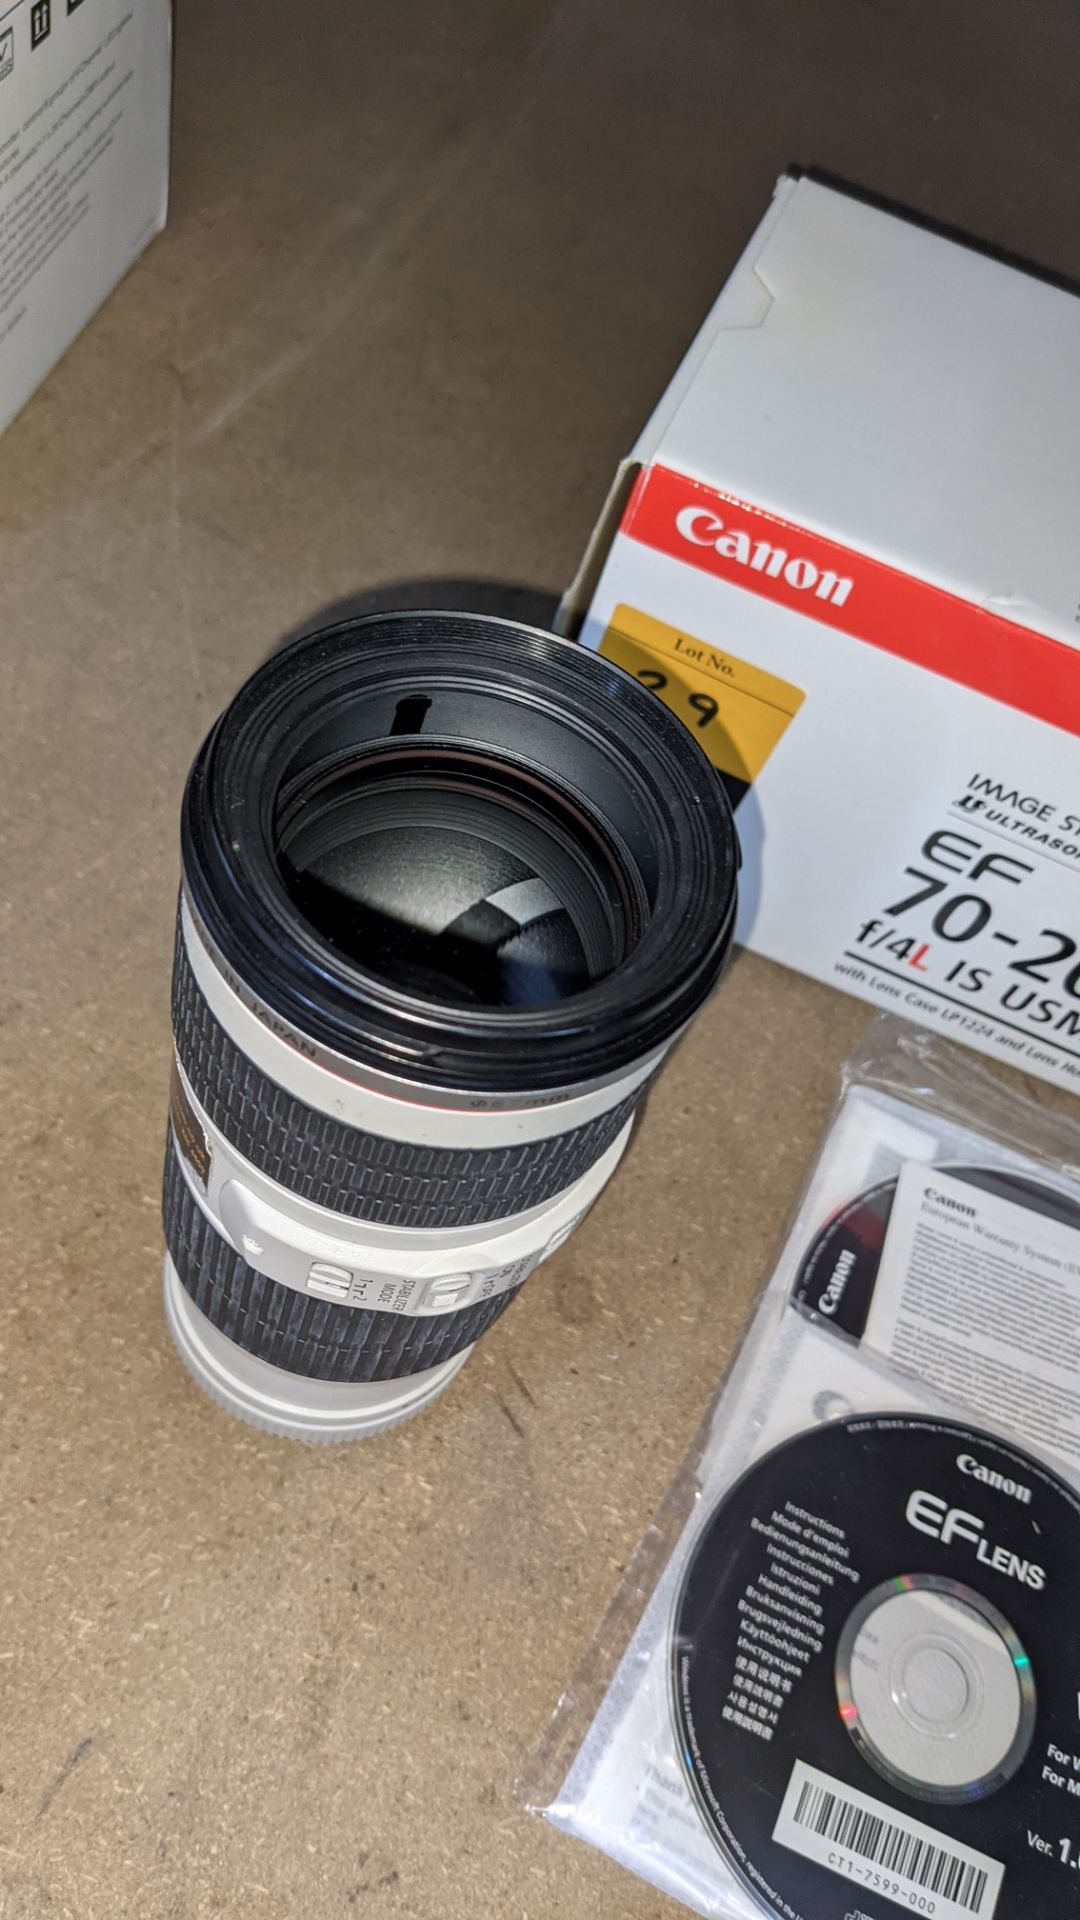 Canon EF 70-200mm lens, image stabilizer ultrasonic, F/4L IS USM. Includes box & discs as pictured - Image 9 of 13